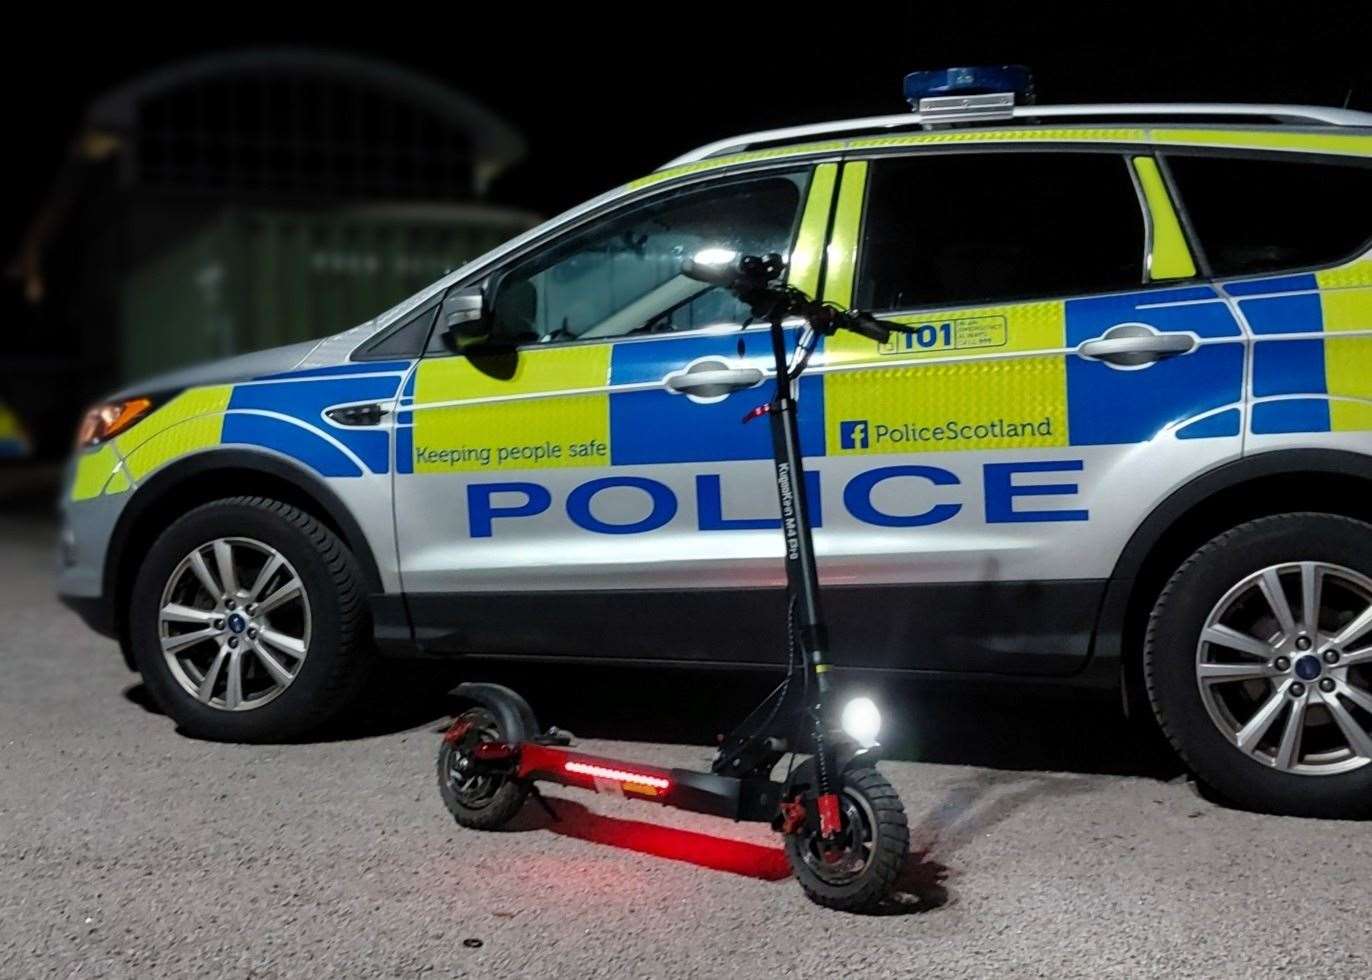 An E-Scooter was seized in Port Elphinstone for being ridden illegally on the road.